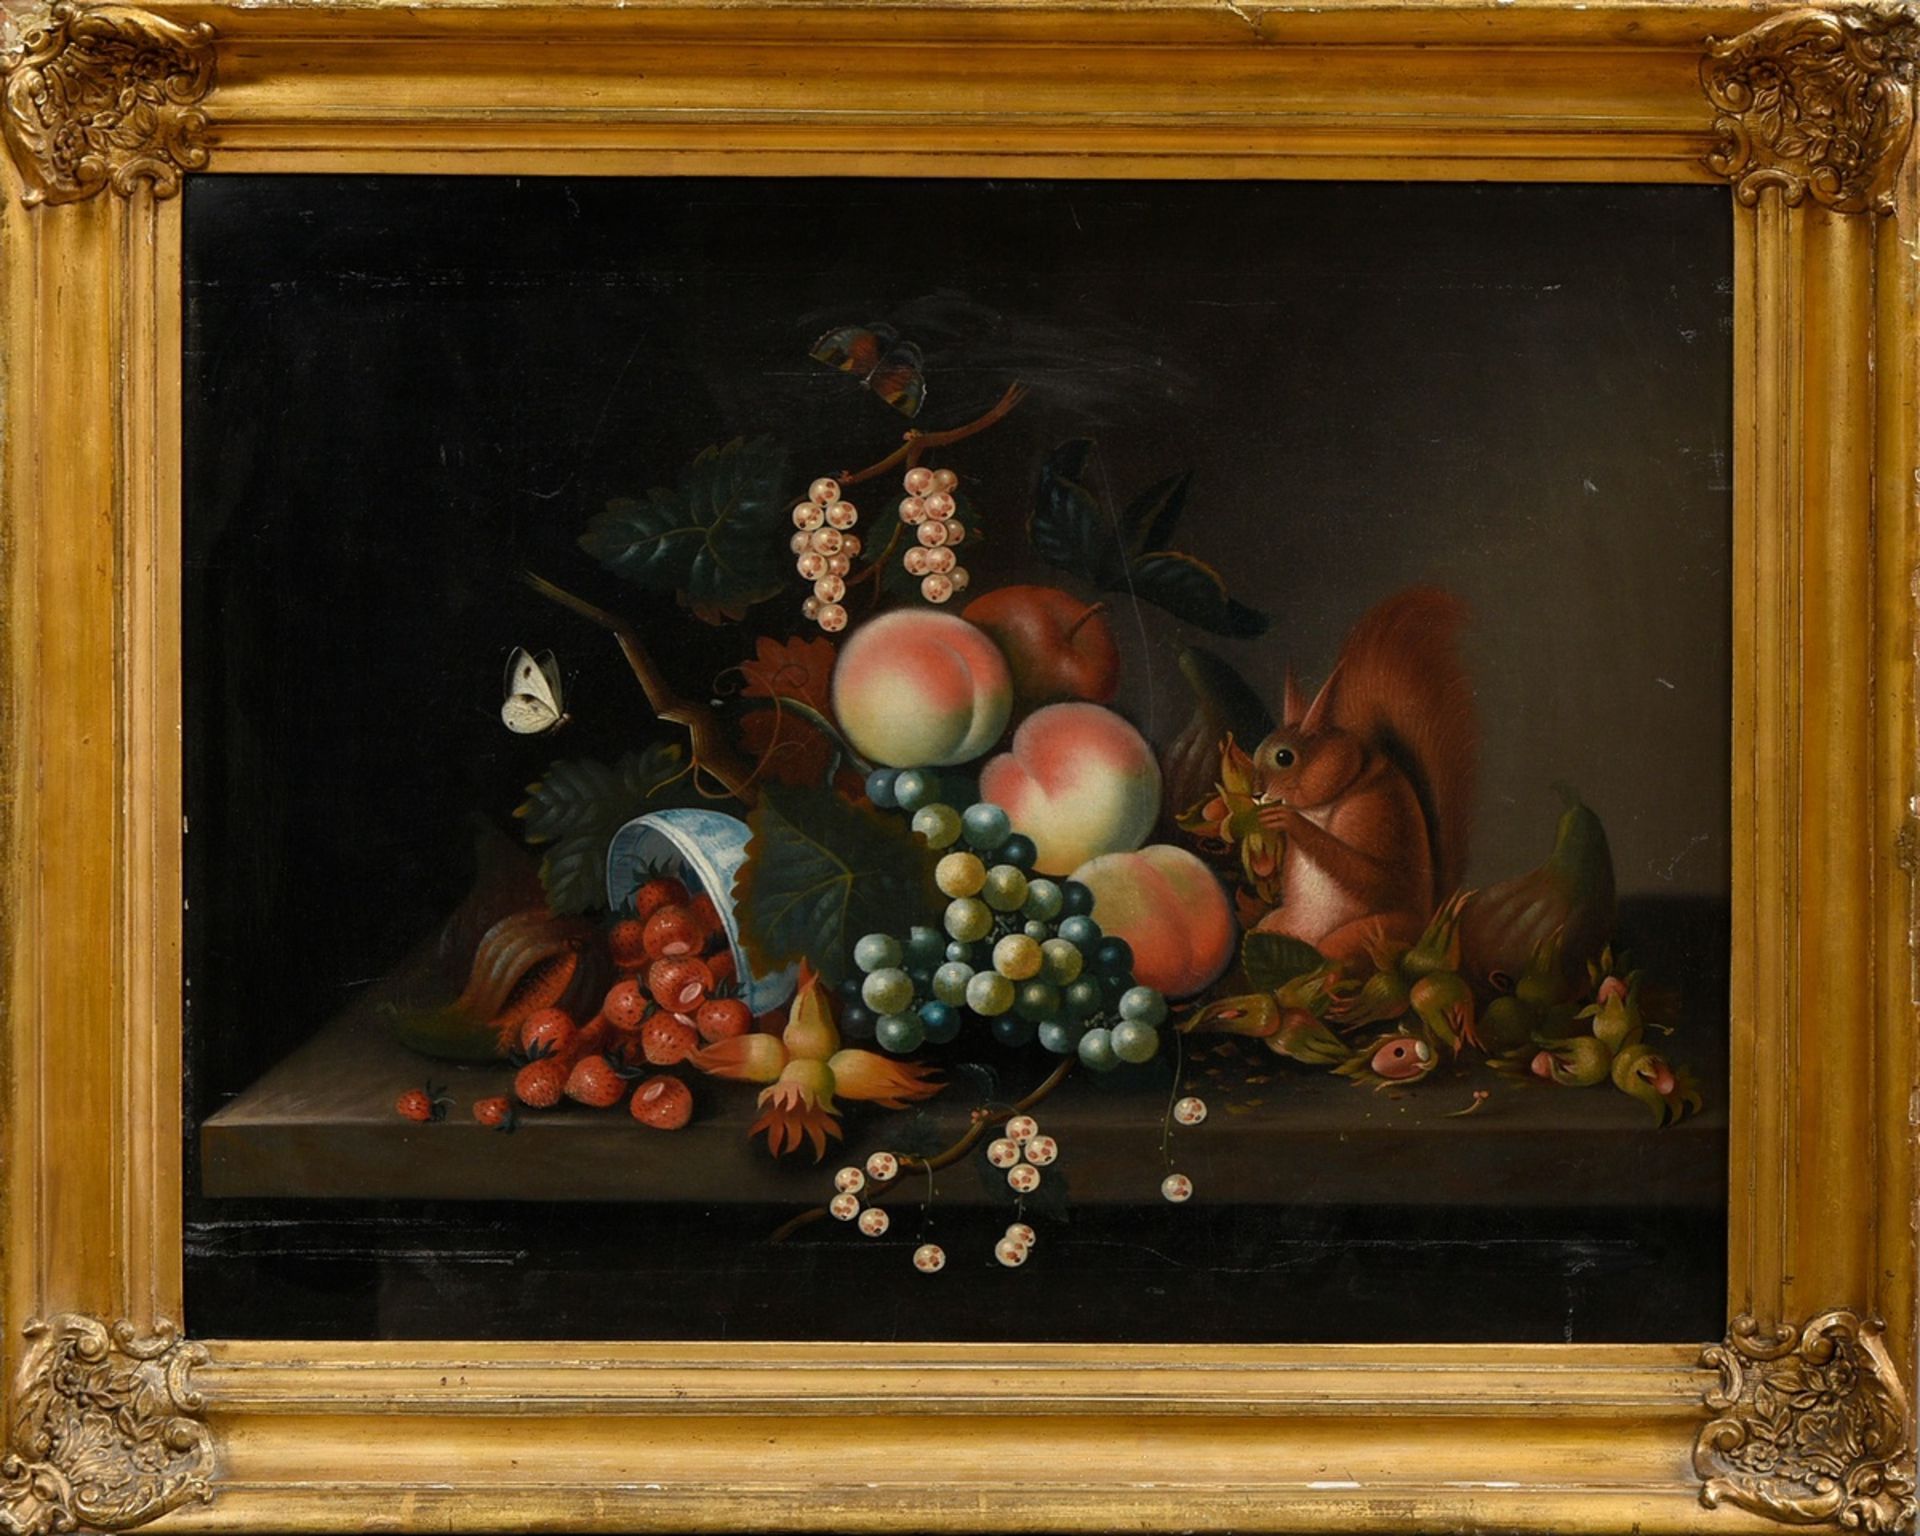 Stranovius, Tobias (1684-1756) Succession "Still Life of Fruit with Butterflies and Squirrels", oil - Image 2 of 7